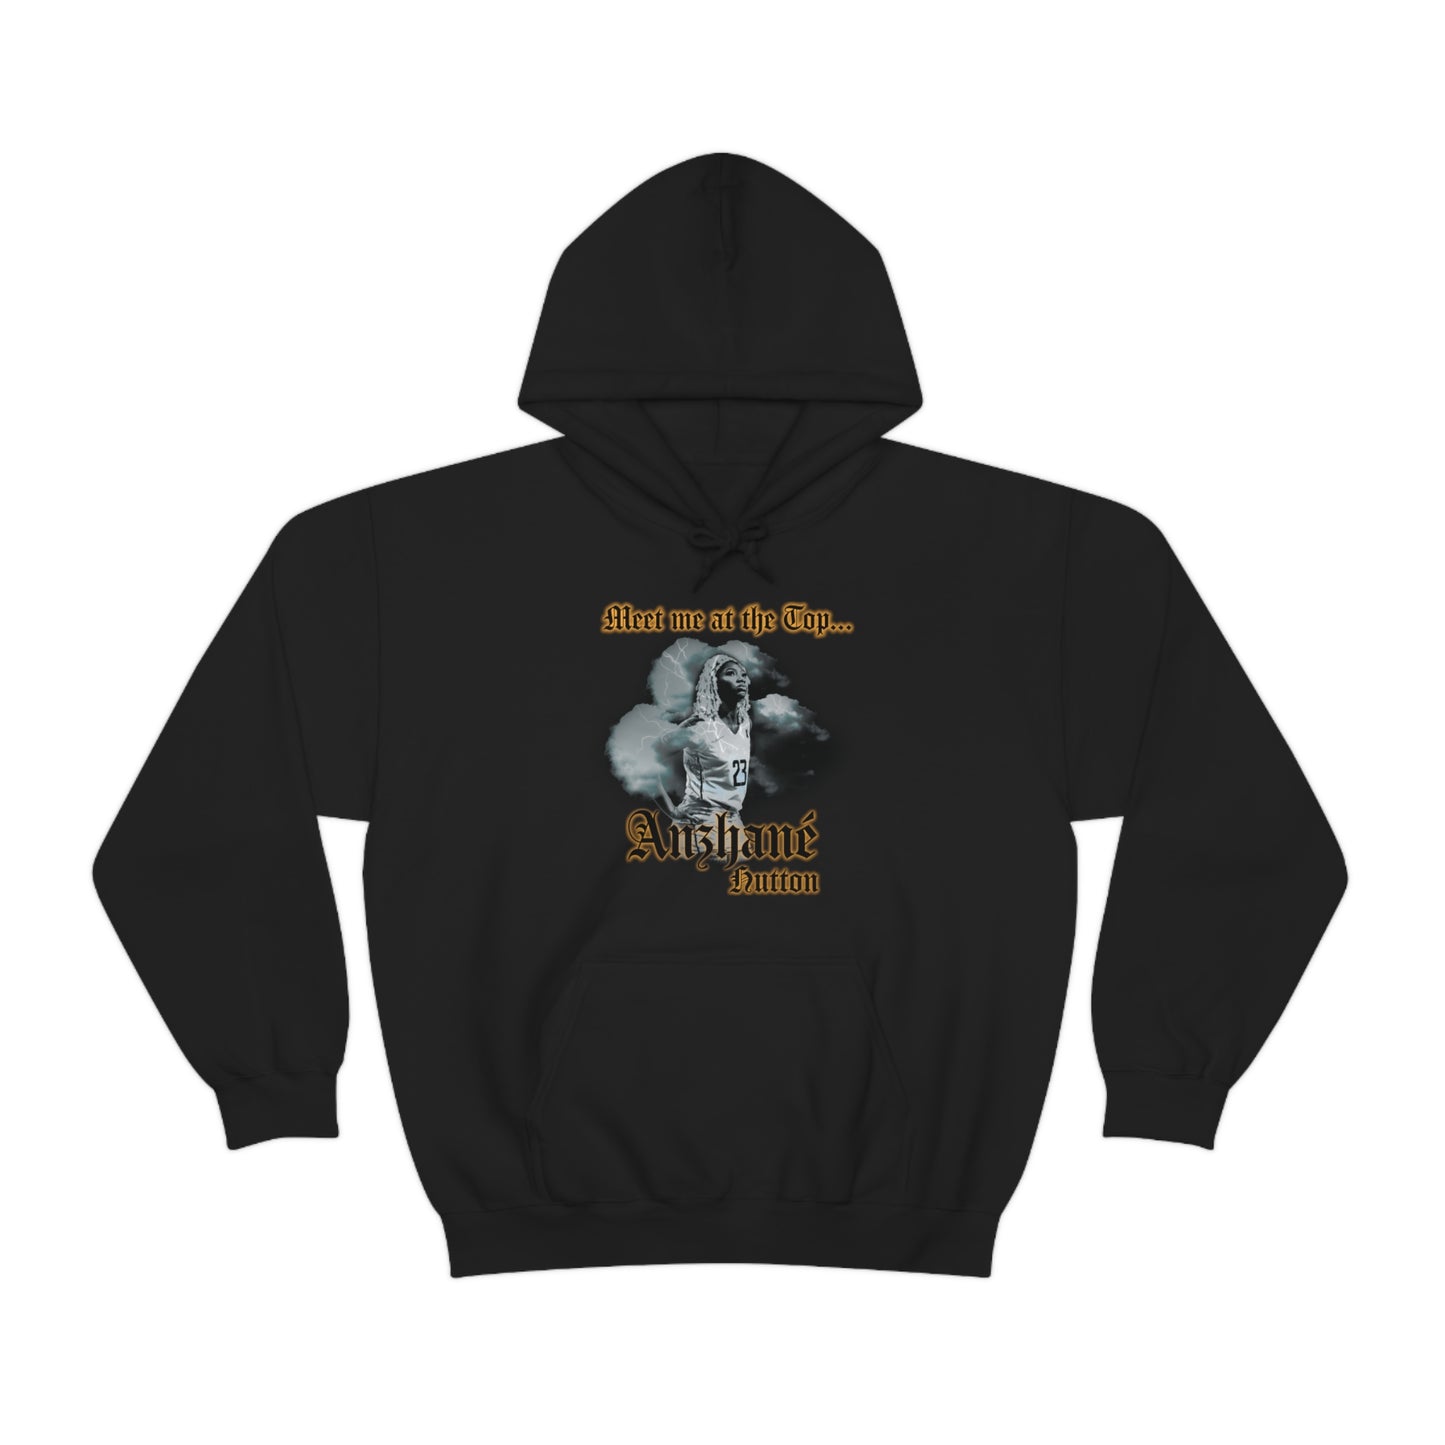 Anzhané Hutton: Meet Me At The Top Hoodie